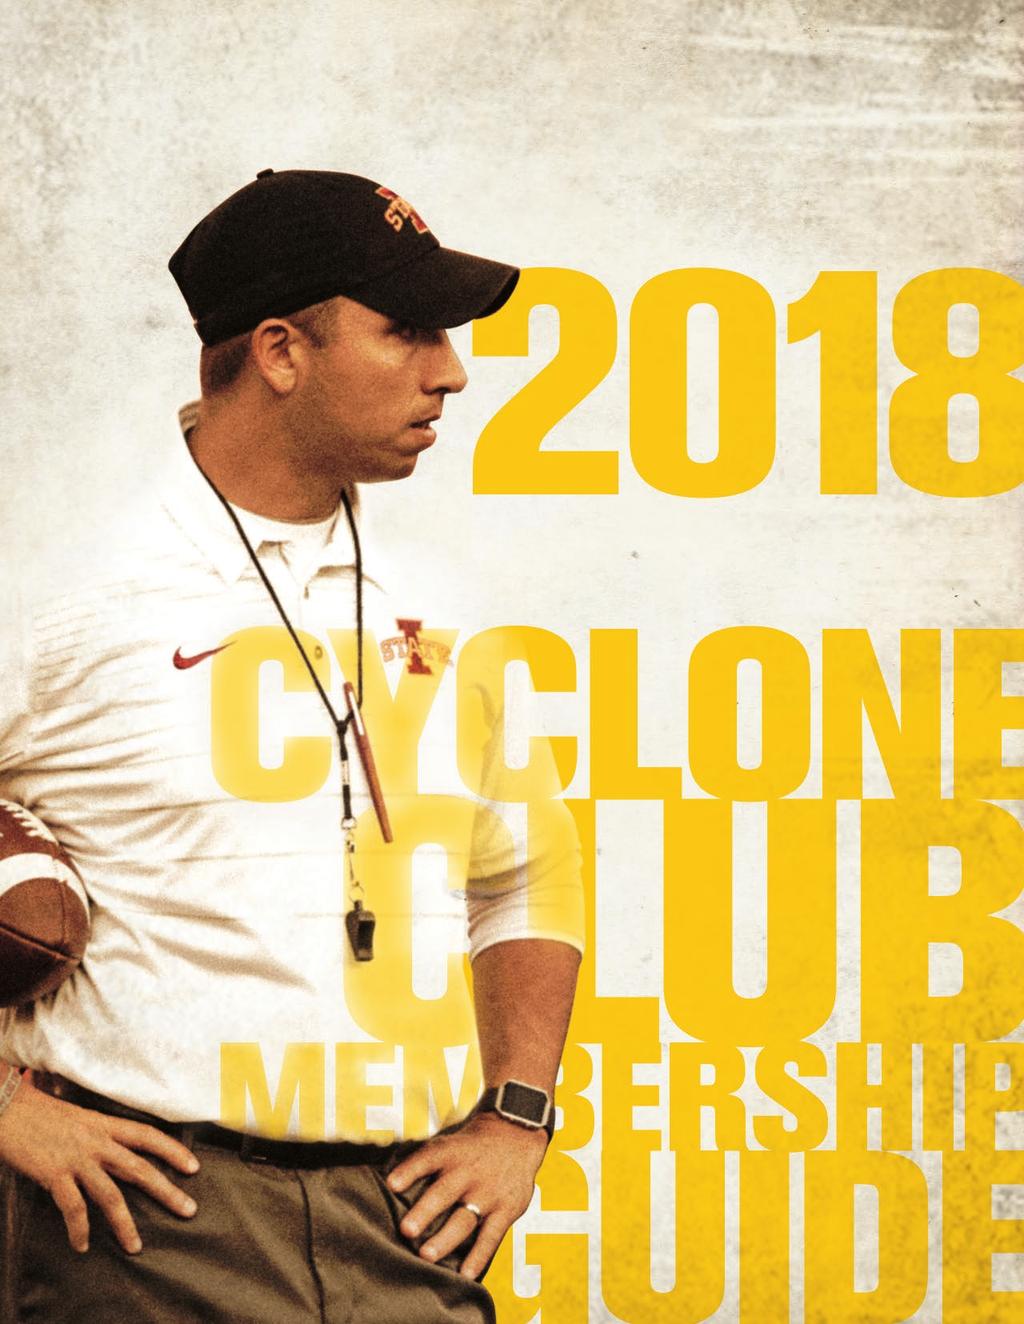 ENGAGE INVEST ACHIEVE CYCLONE CLUB MEMBERSHIP GUIDE > > > > > > > > > > > > > > > > > > > > > >